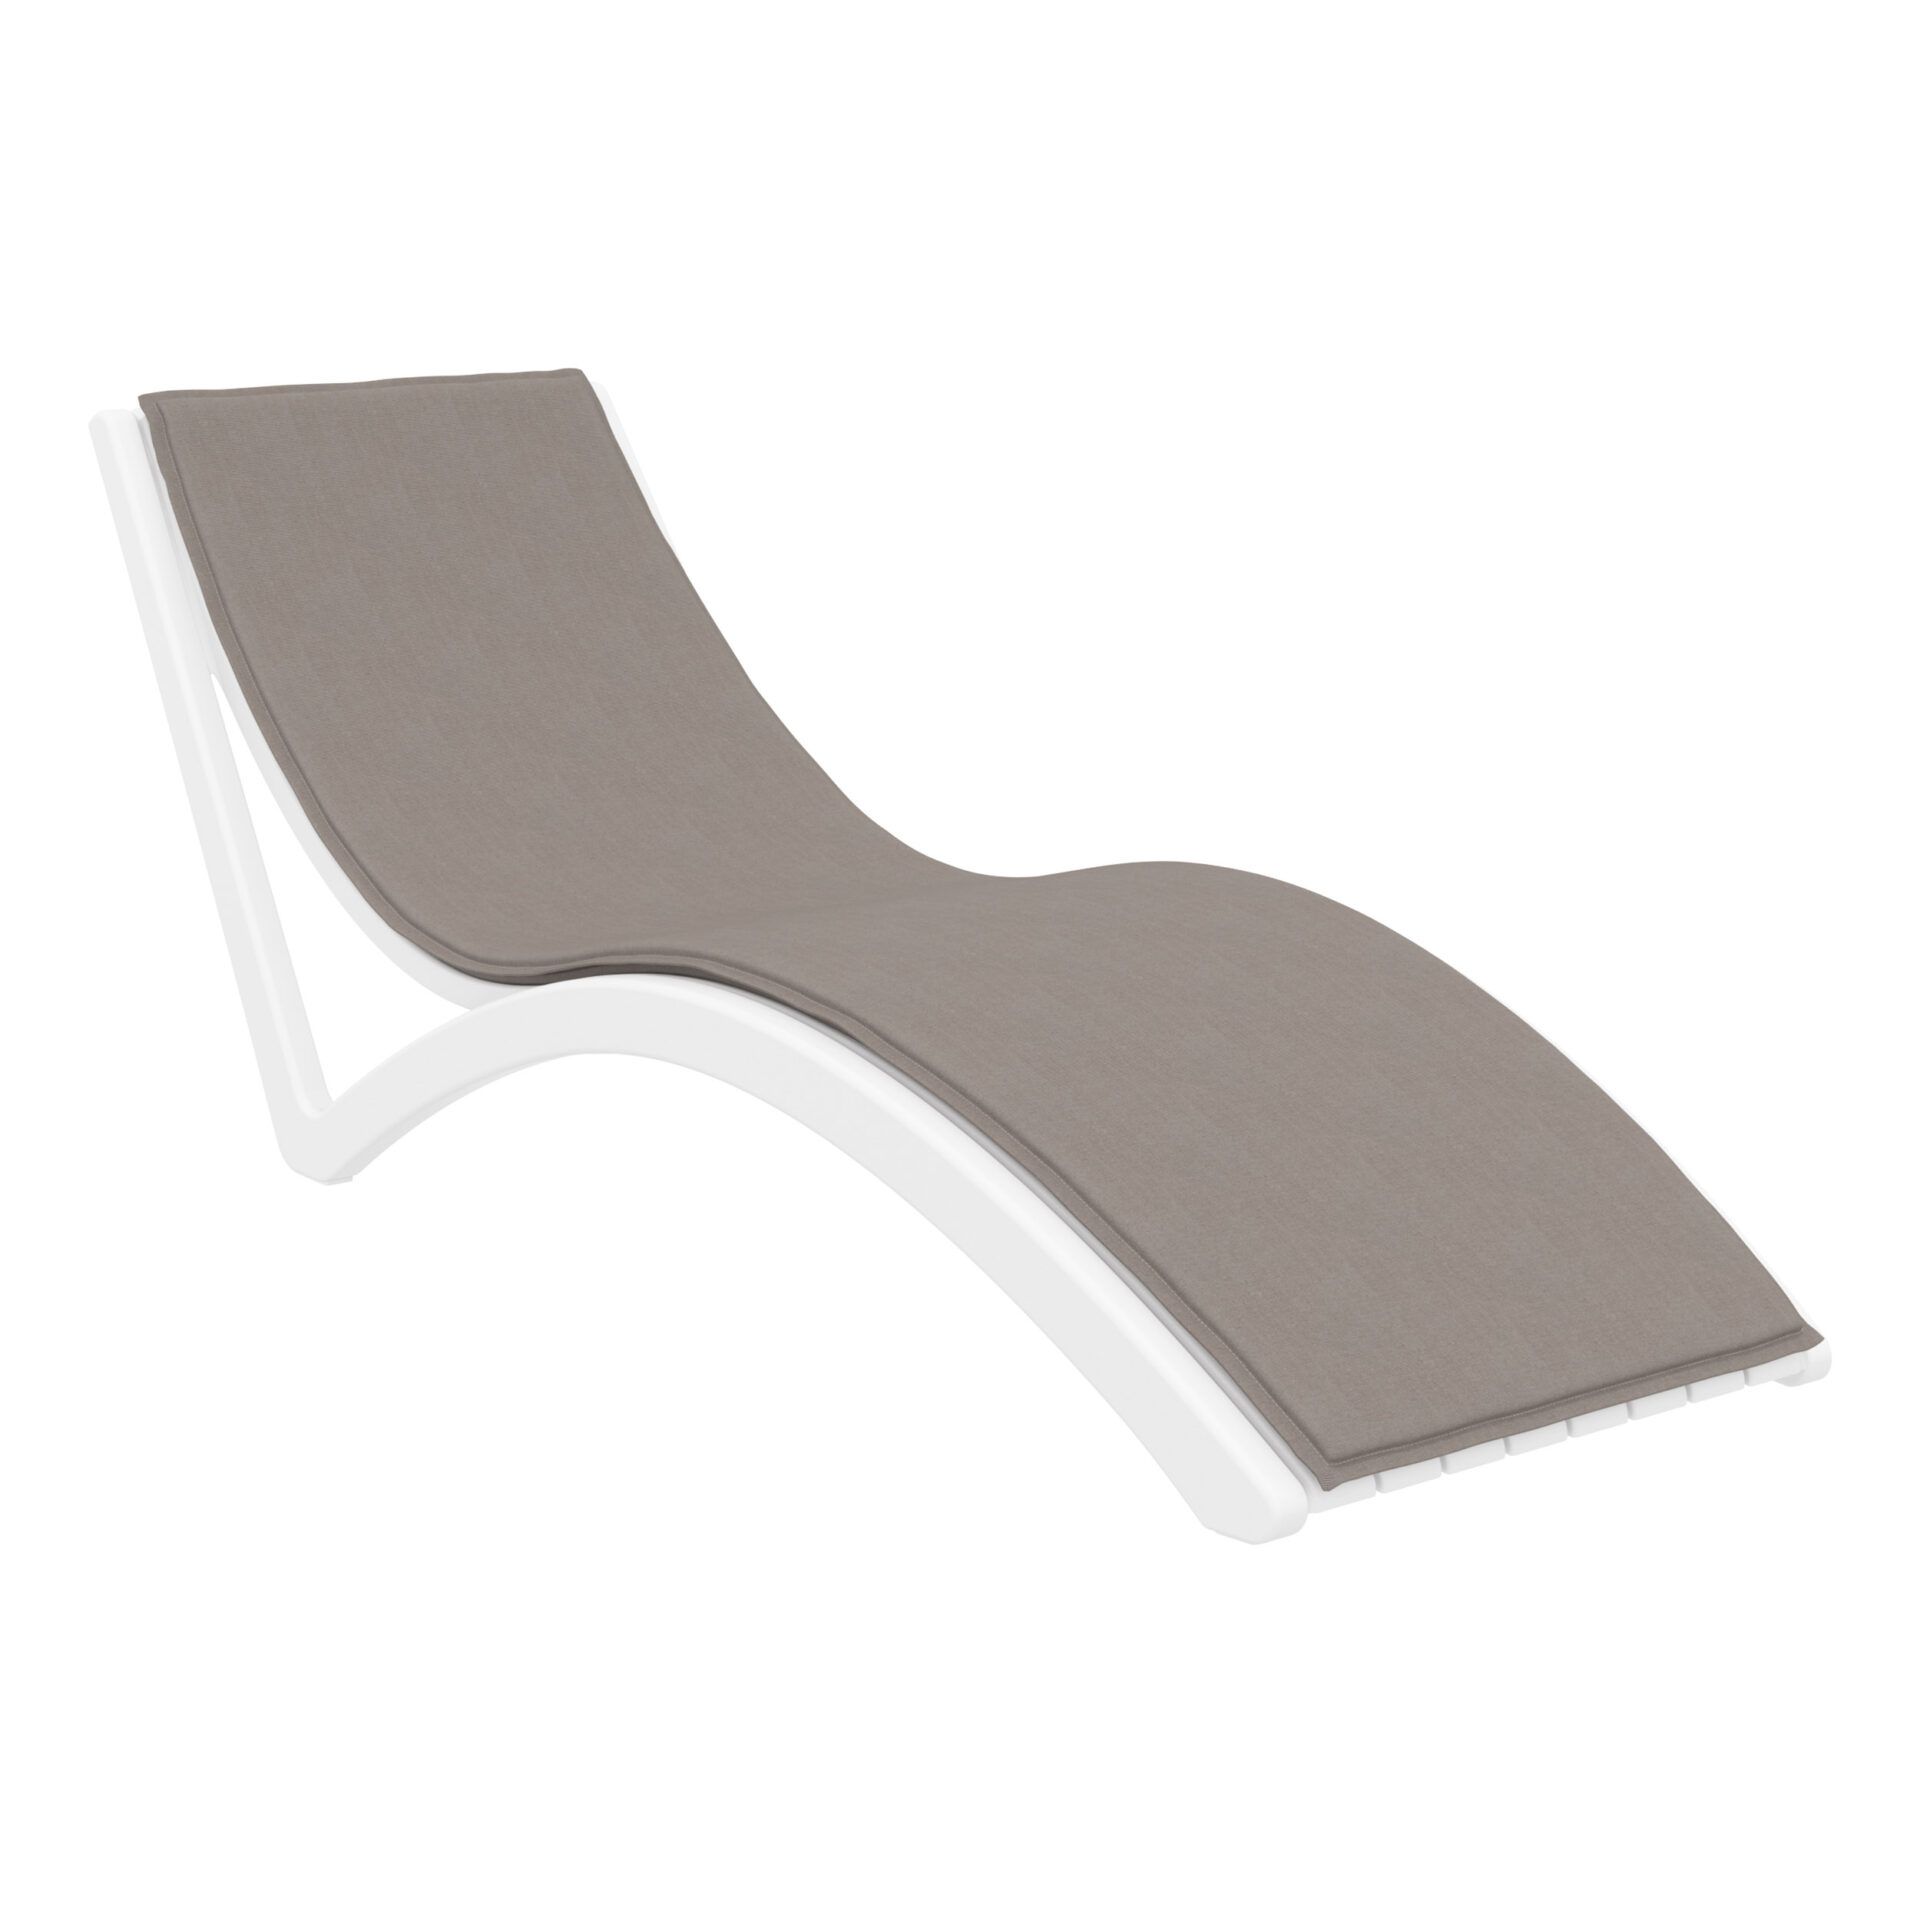 outdoor polypropylene slim sunlounger cushion white brown front side